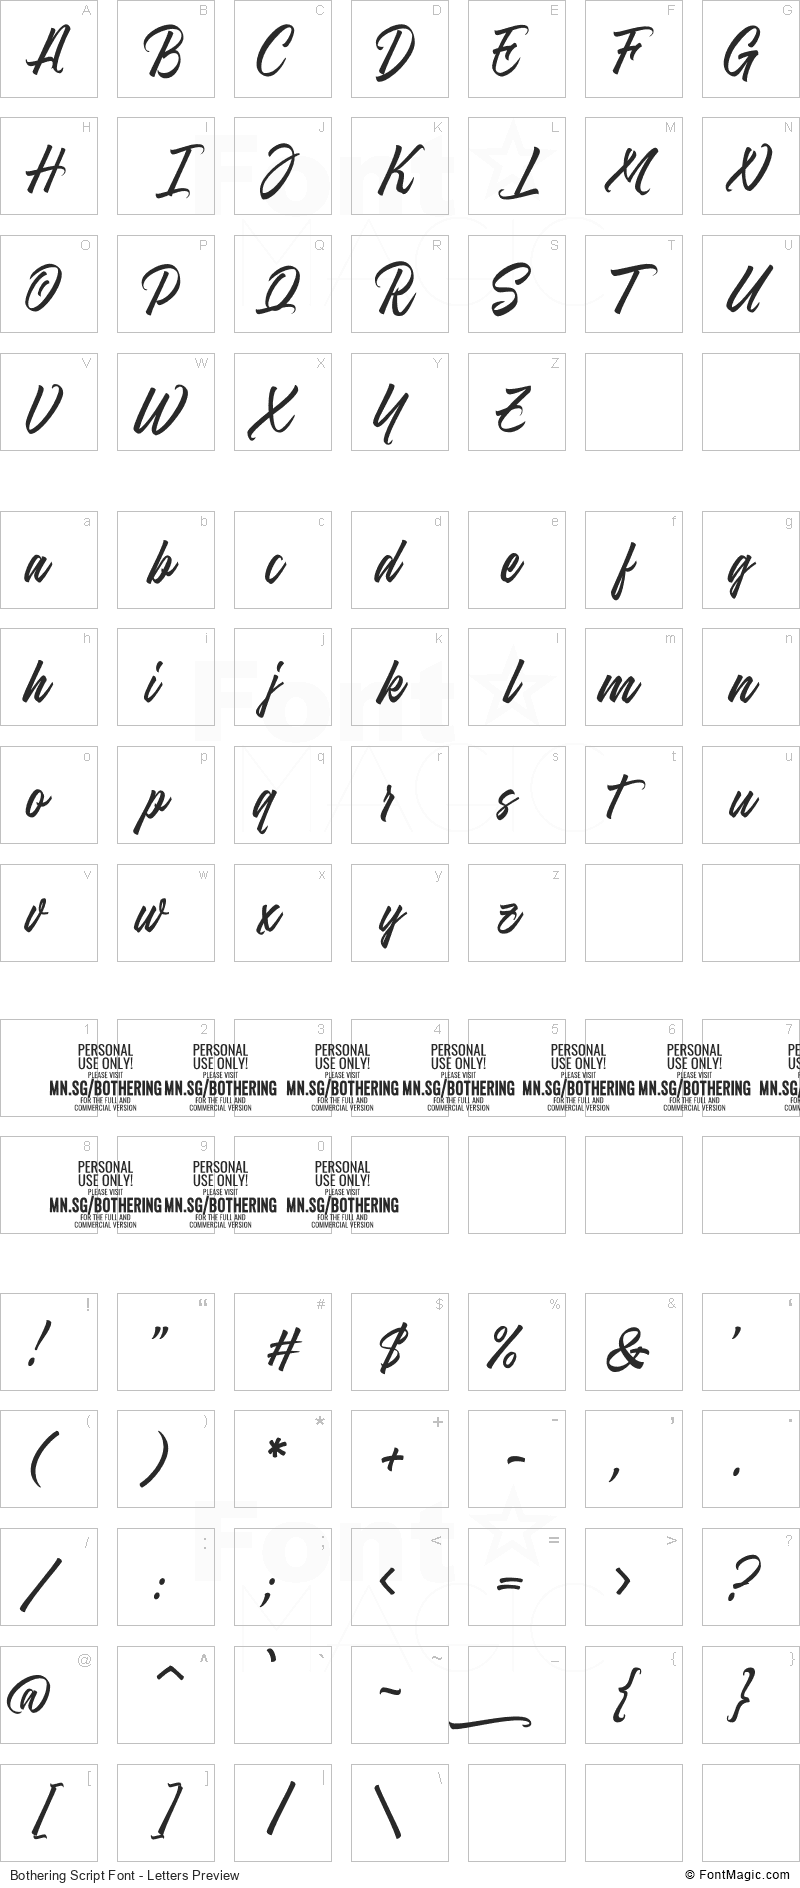 Bothering Script Font - All Latters Preview Chart